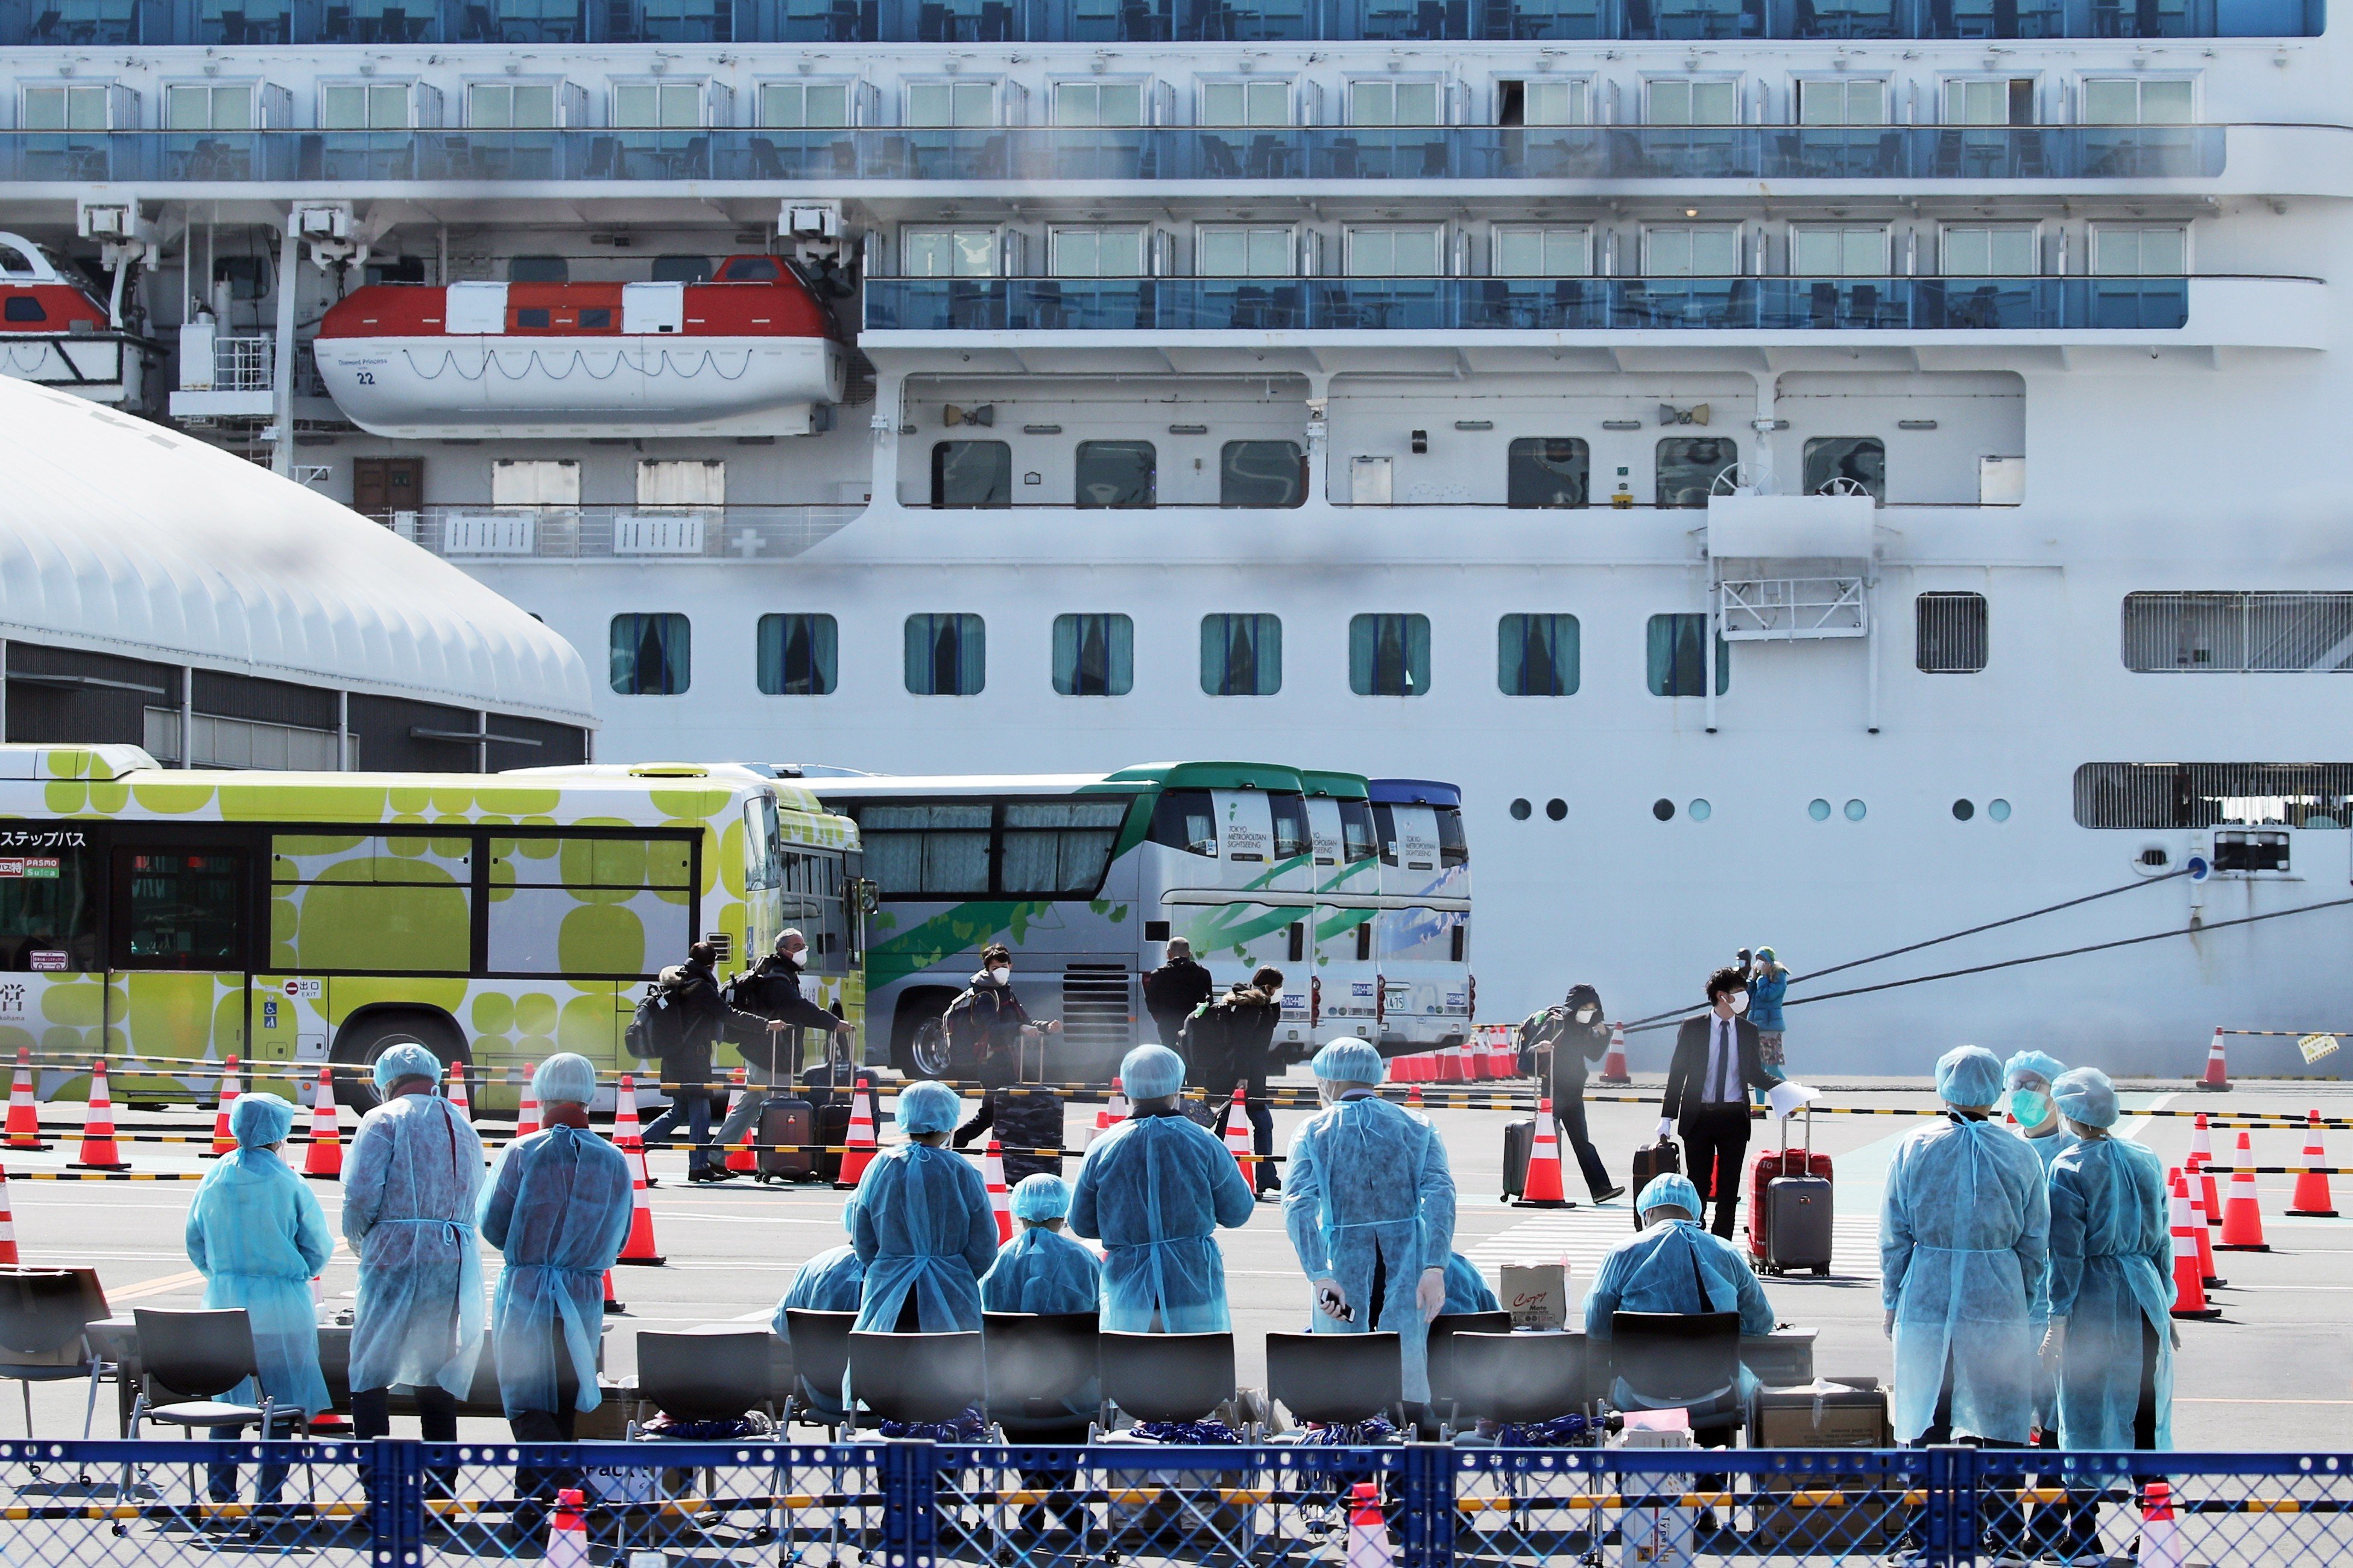 Workers in protective gear prepare to check passengers after they disembarked the Diamond Princess cruise ship, which has been quarantined, at the Daikoku Pier Cruise Terminal in Yokohama, Japan. Photo: EPA-EFE